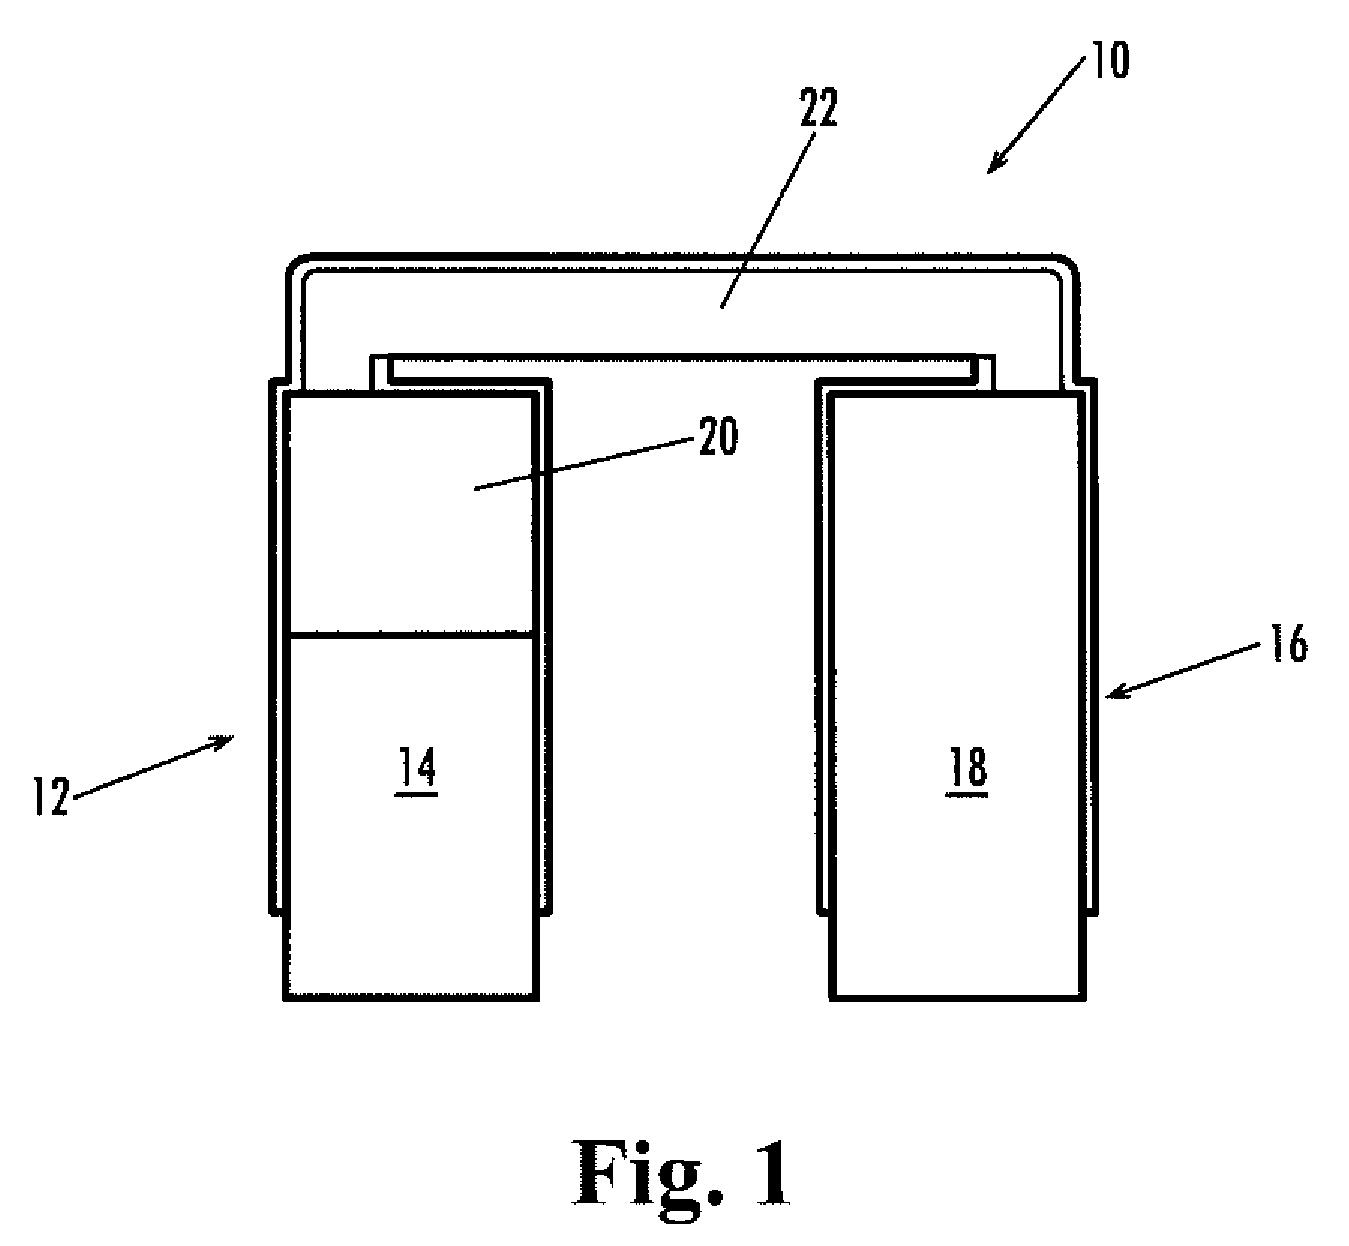 Systems and Methods for Generating Electricity Using a Stirling Engine